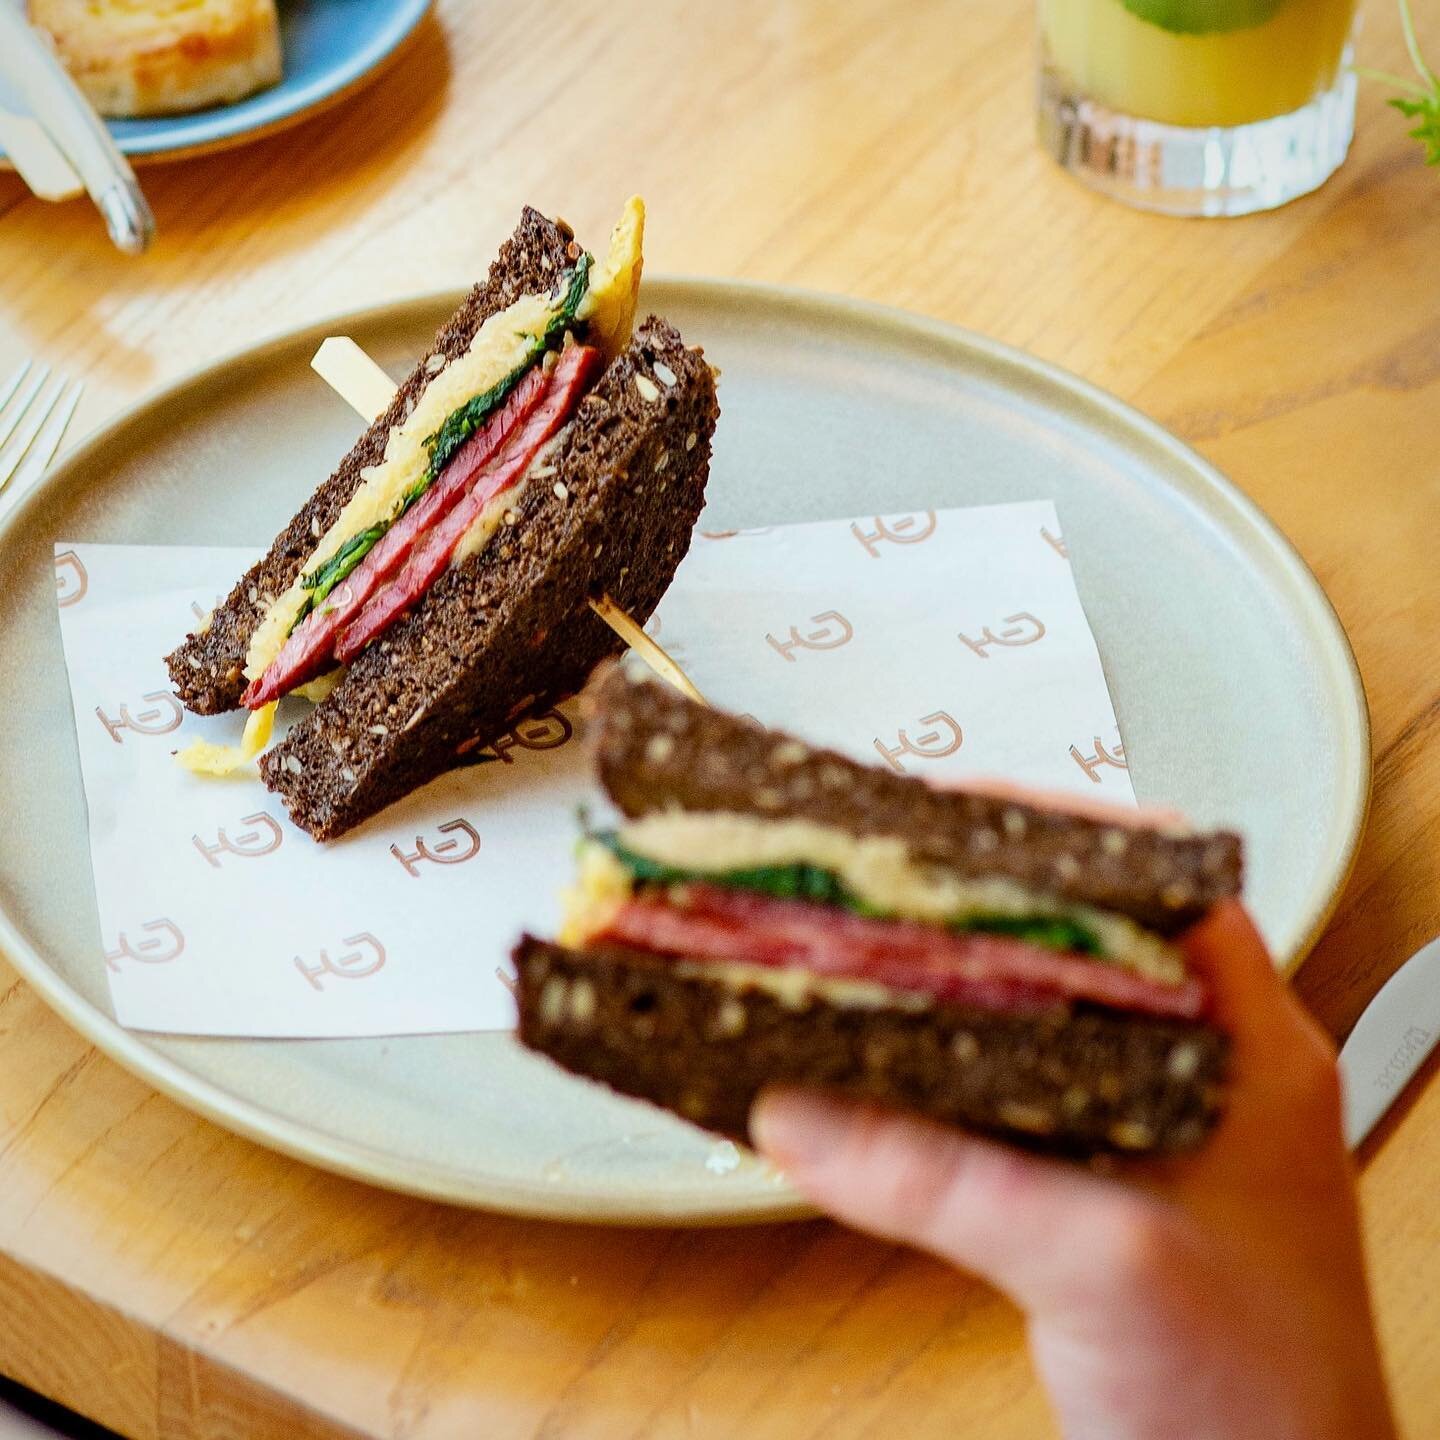 The Two Grey Reuben: House cooked corned beef, mustard sauce, spinach, Swiss cheese &amp; house kimchi, served on toasted rye.⁣
⁣
That's Wednesday lunch covered!🍴Book via the link in our bio 👀 ⁣
⁣
#twogrey &bull;  04 495 7867 &bull; twogrey@ihg.com